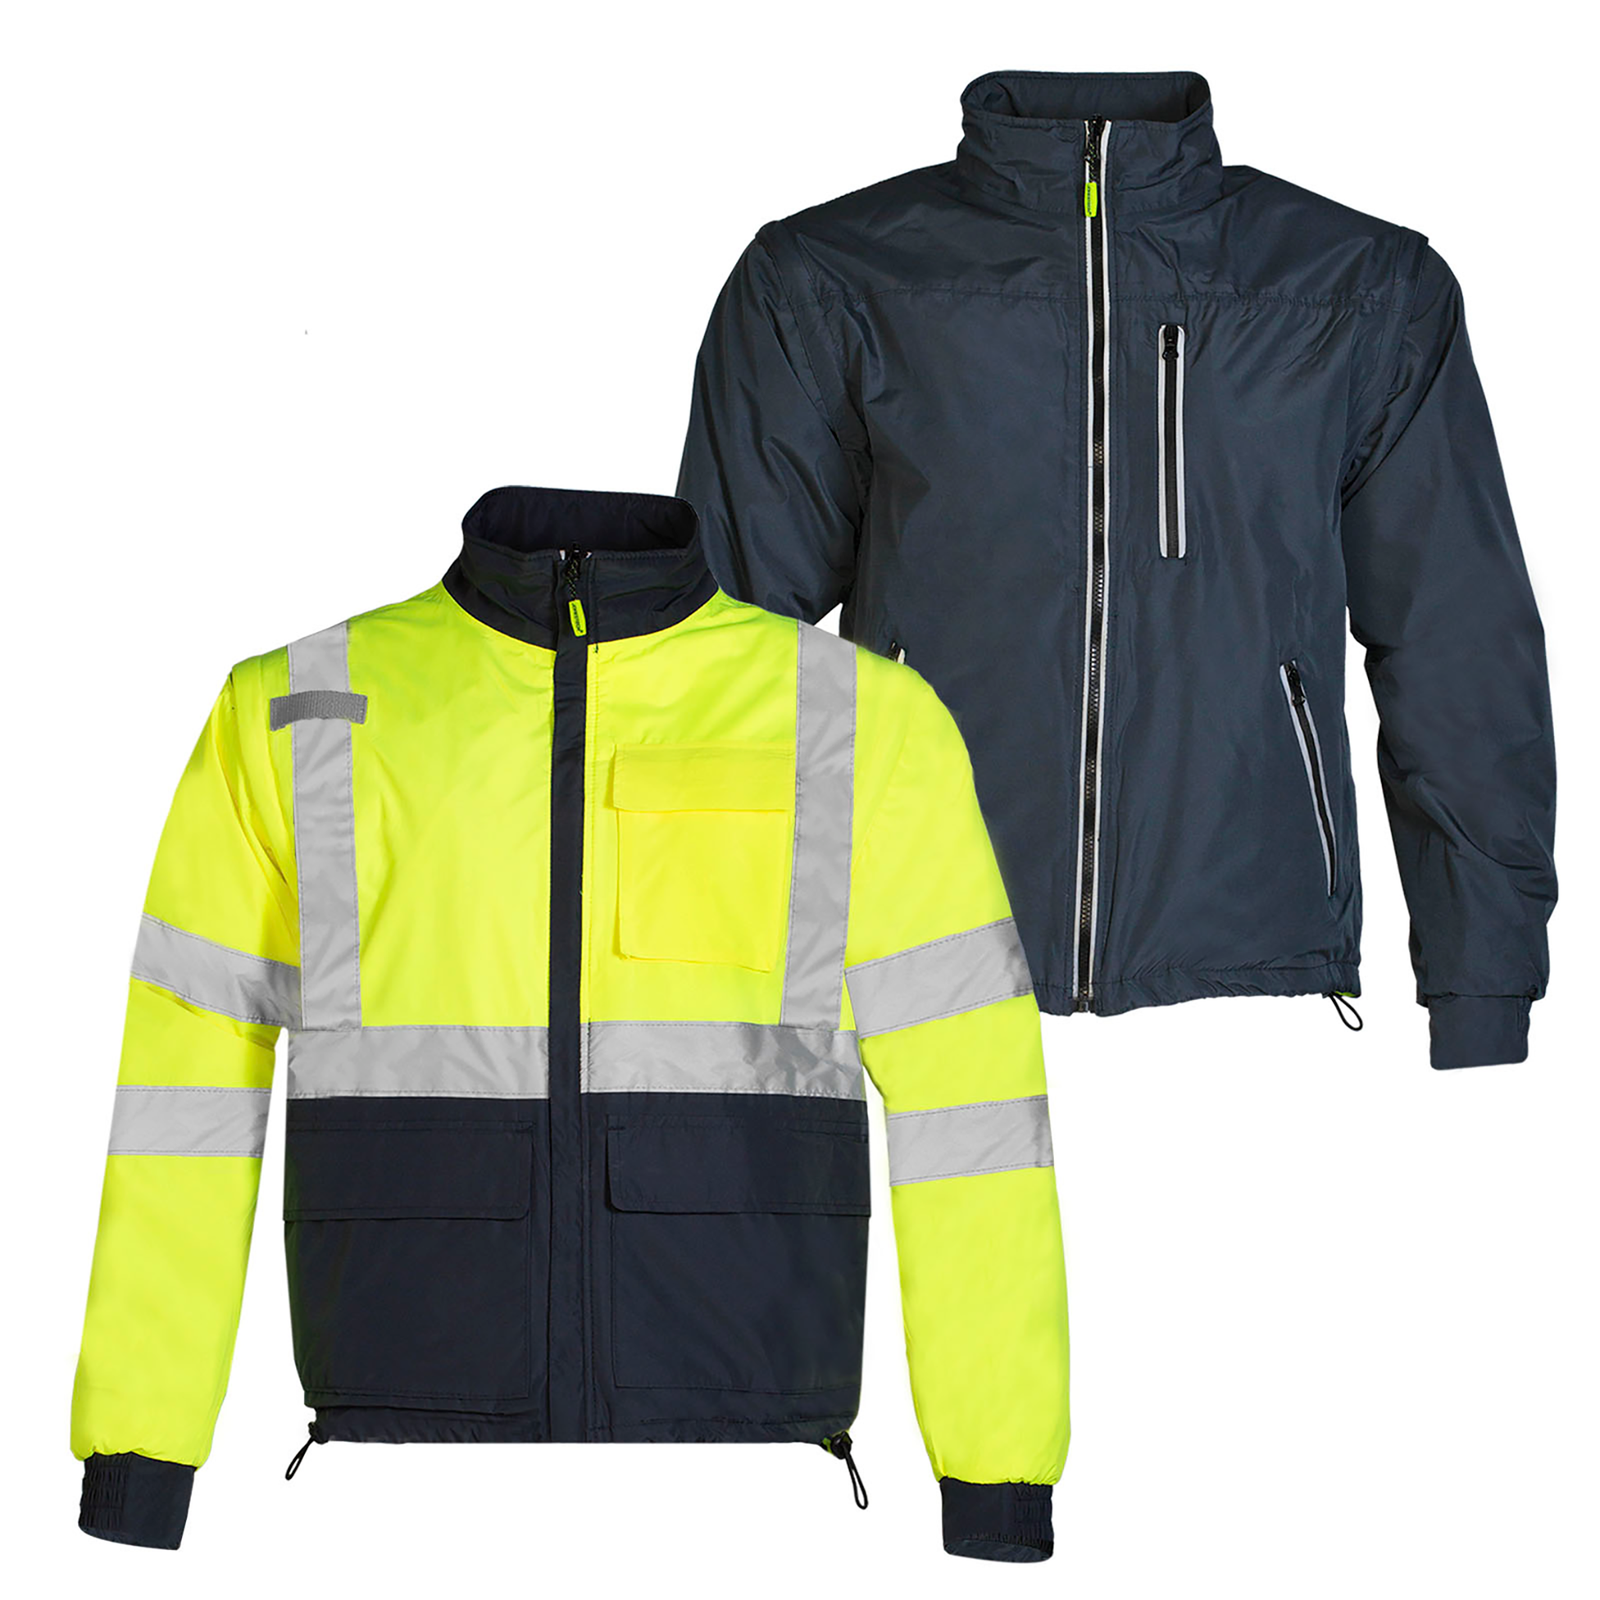 Show the reversible safety jacket seen from the reflective and from the non reflective sides